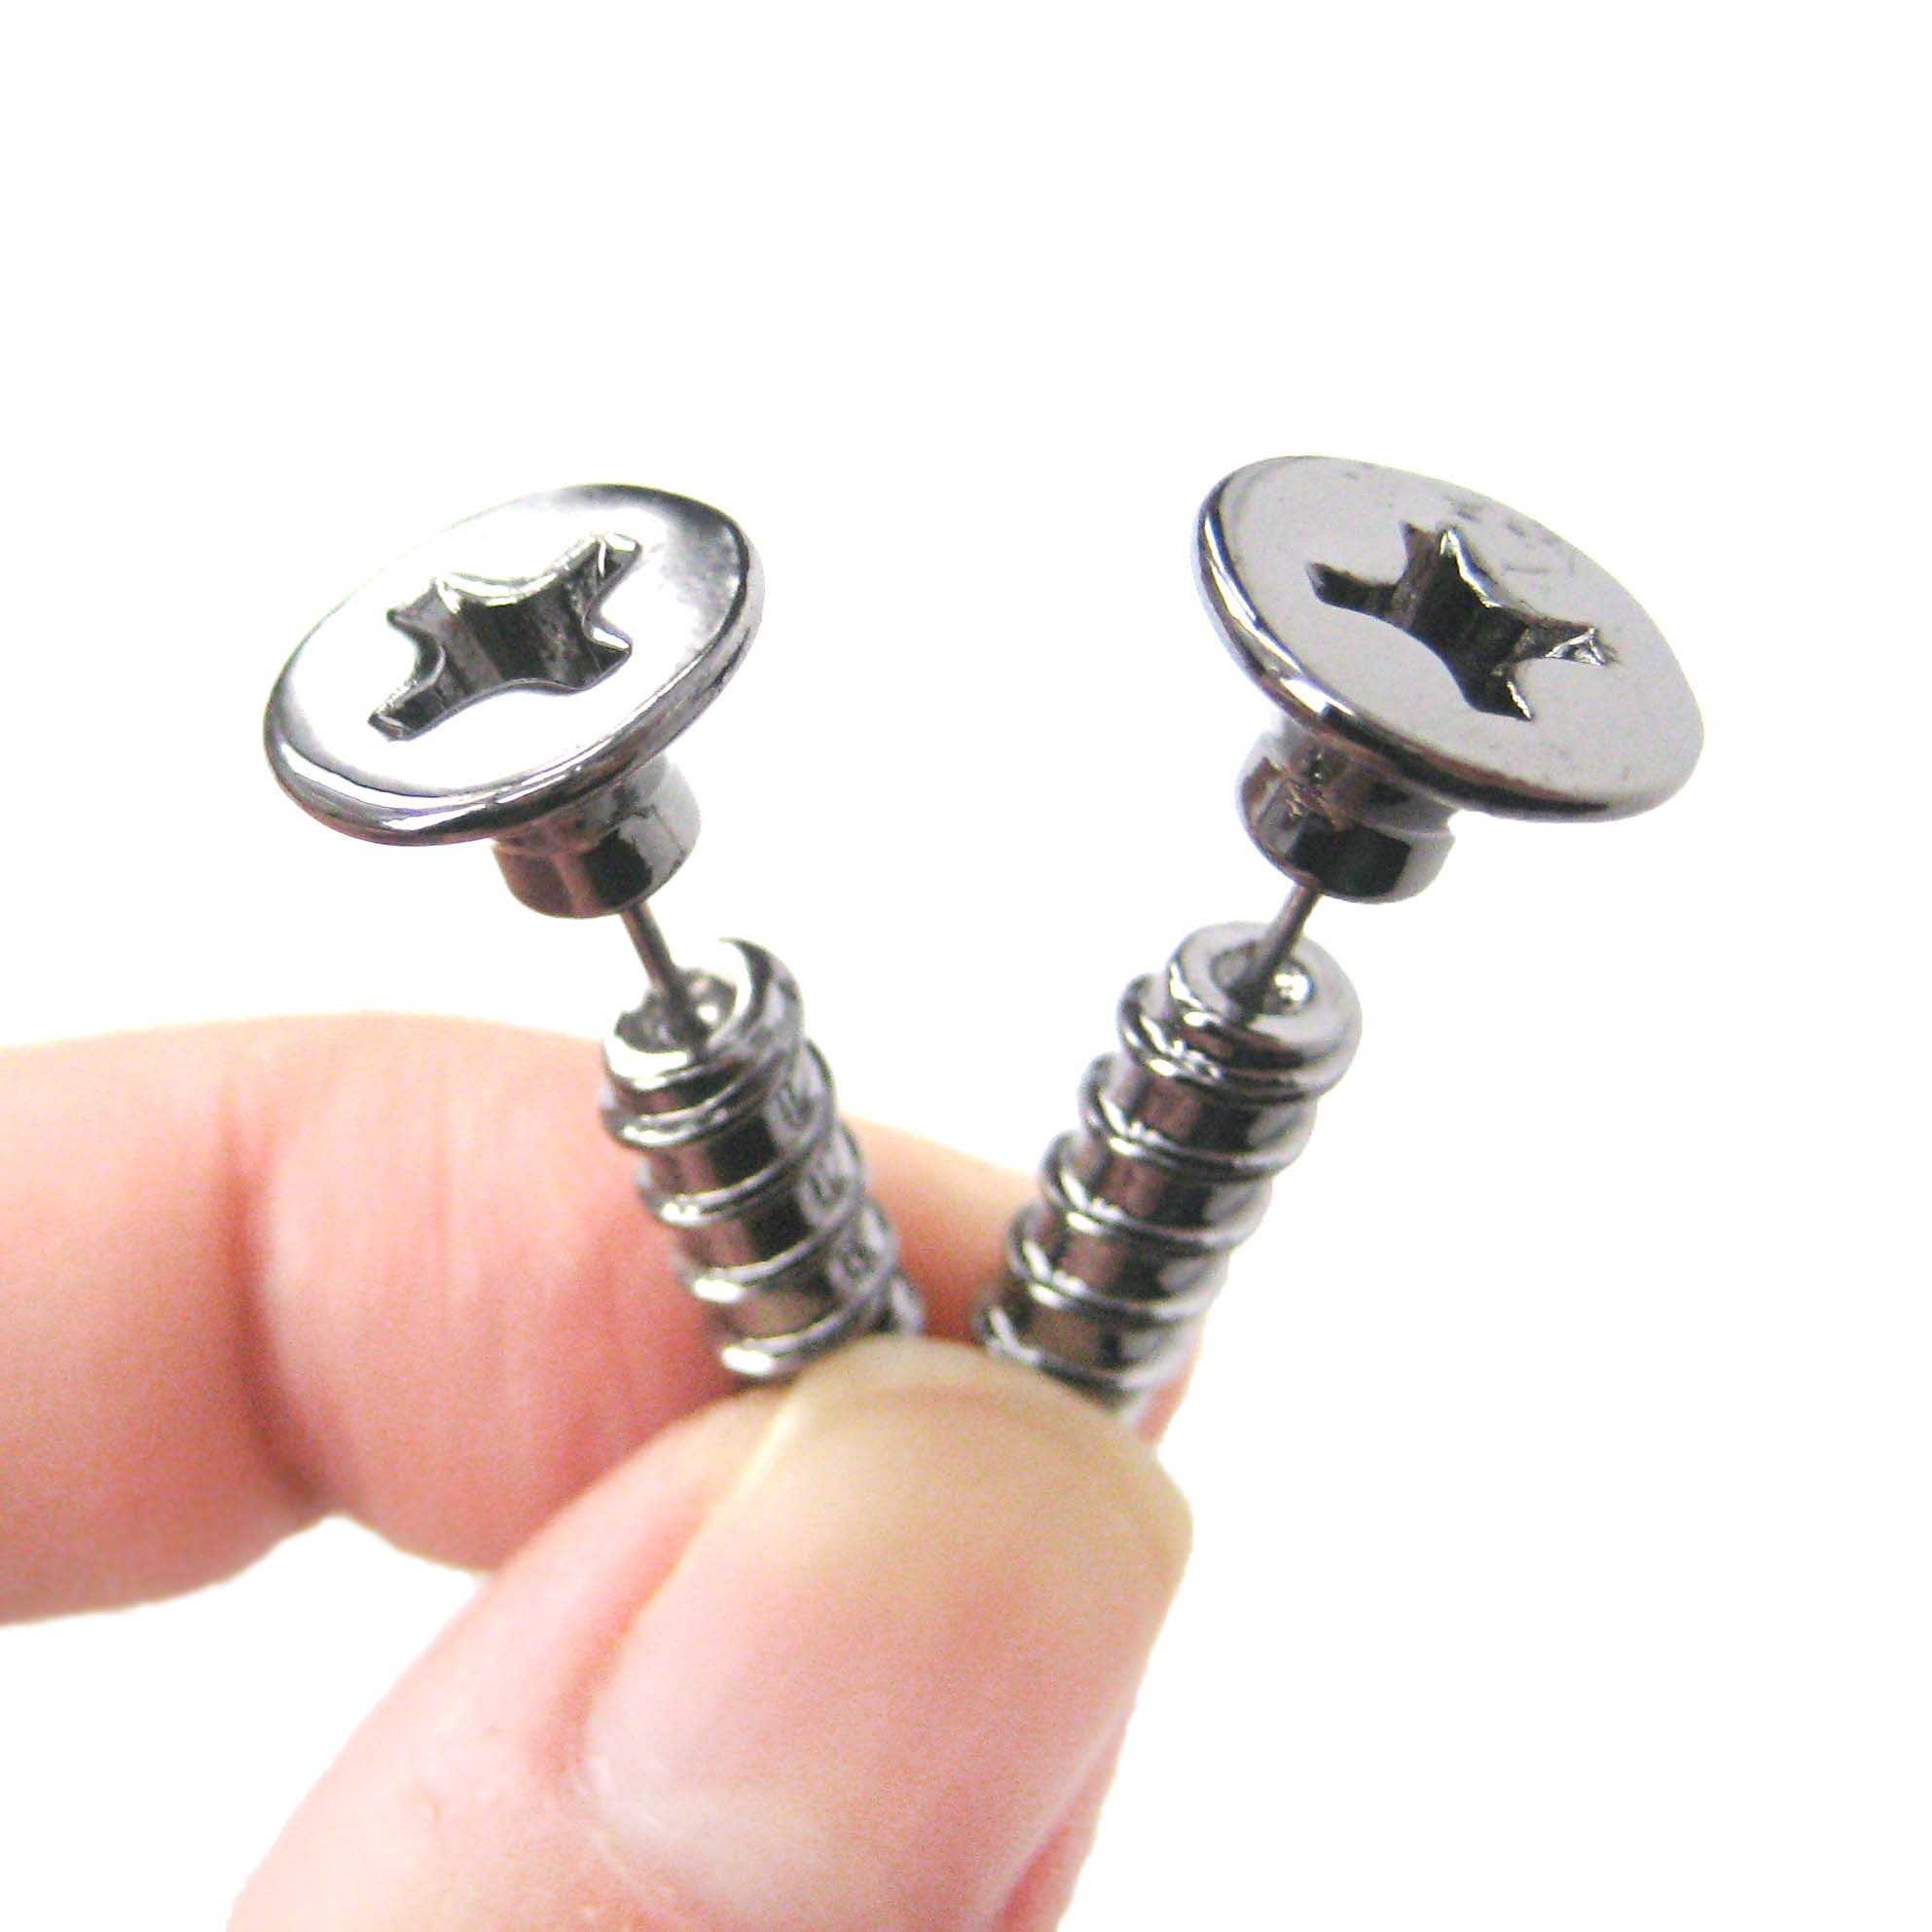 Fake Gage Earrings
 3D Fake Gauge Realistic Nuts and Bolts Screw Stud Earrings